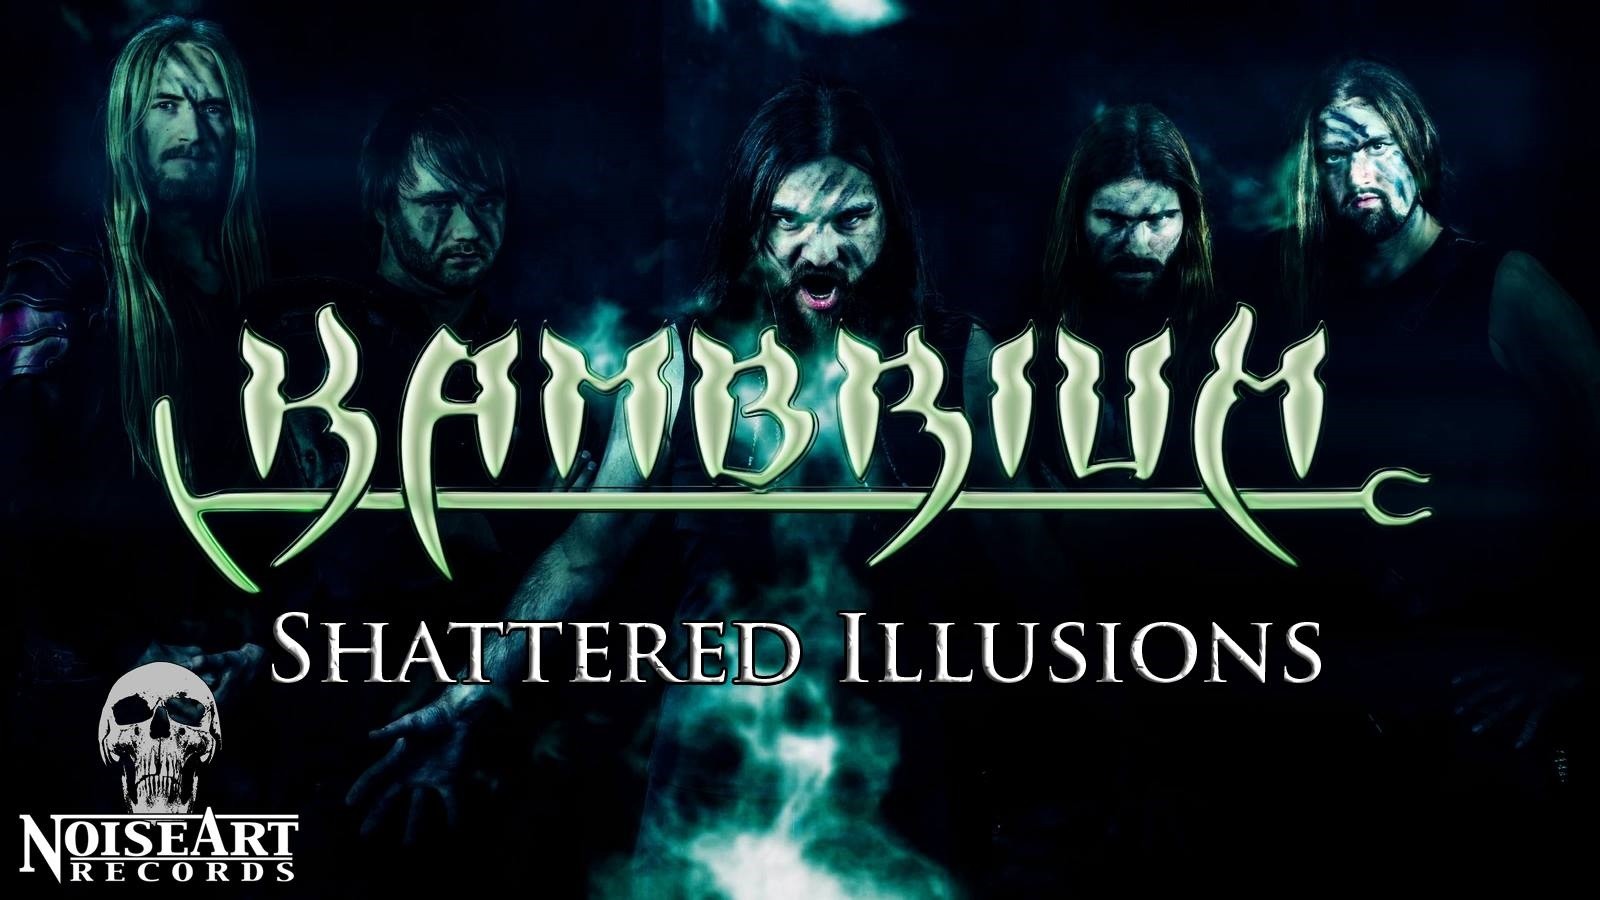 first digital single “Shattered Illusions” released